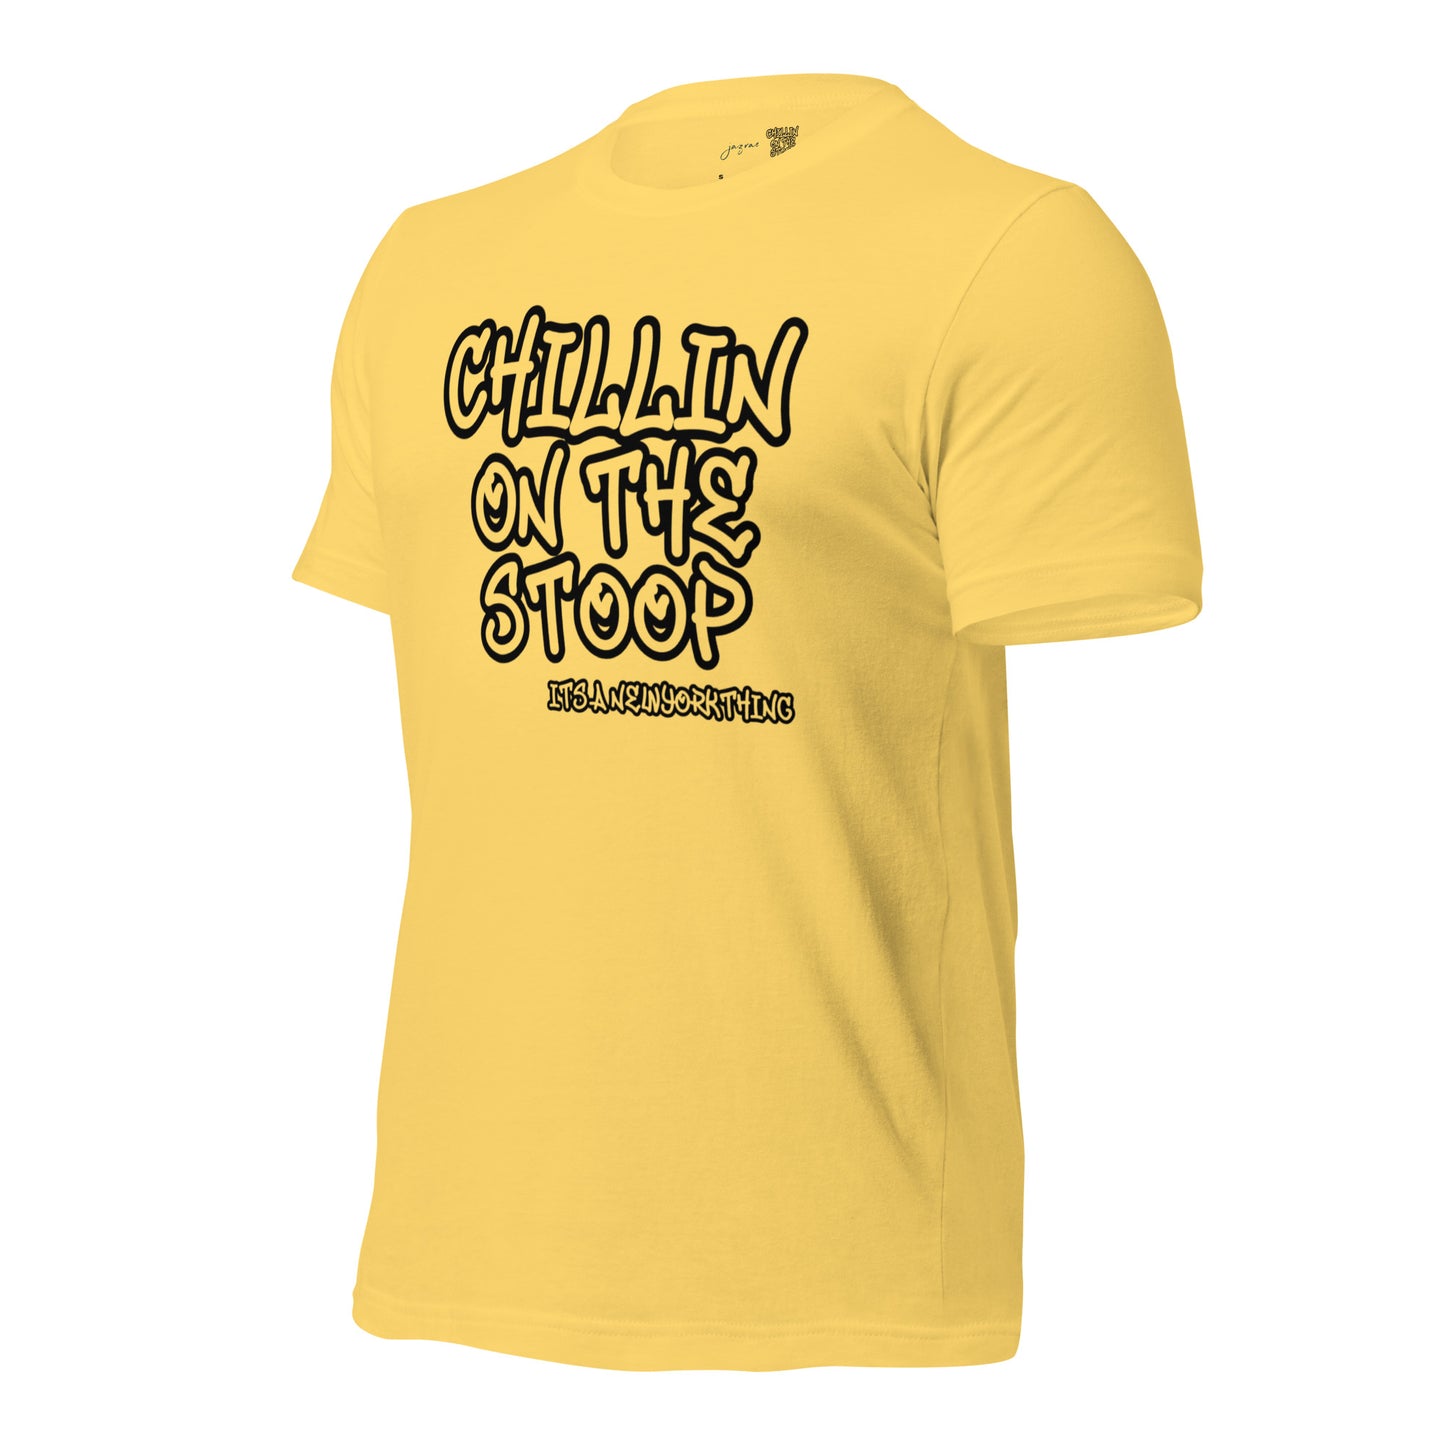 #1 CHILLIN ON THE STOOP Unisex t-shirt in different colors